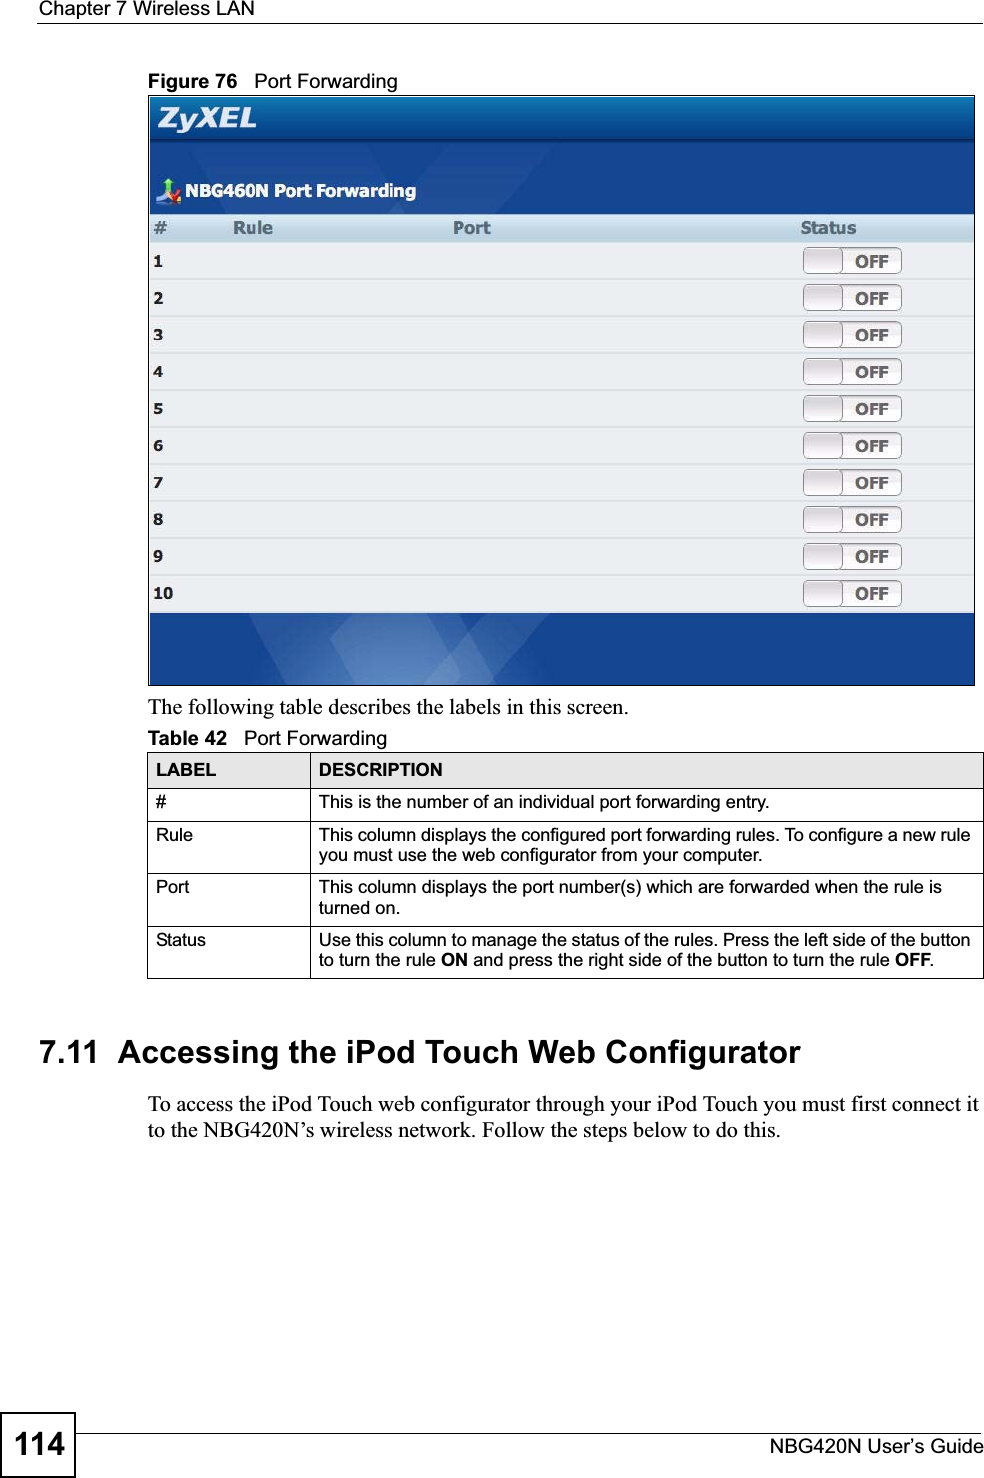 Chapter 7 Wireless LANNBG420N User’s Guide114Figure 76   Port ForwardingThe following table describes the labels in this screen.7.11  Accessing the iPod Touch Web ConfiguratorTo access the iPod Touch web configurator through your iPod Touch you must first connect it to the NBG420N’s wireless network. Follow the steps below to do this.Table 42   Port ForwardingLABEL DESCRIPTION#This is the number of an individual port forwarding entry.Rule This column displays the configured port forwarding rules. To configure a new rule you must use the web configurator from your computer.Port This column displays the port number(s) which are forwarded when the rule is turned on.Status Use this column to manage the status of the rules. Press the left side of the button to turn the rule ON and press the right side of the button to turn the rule OFF.